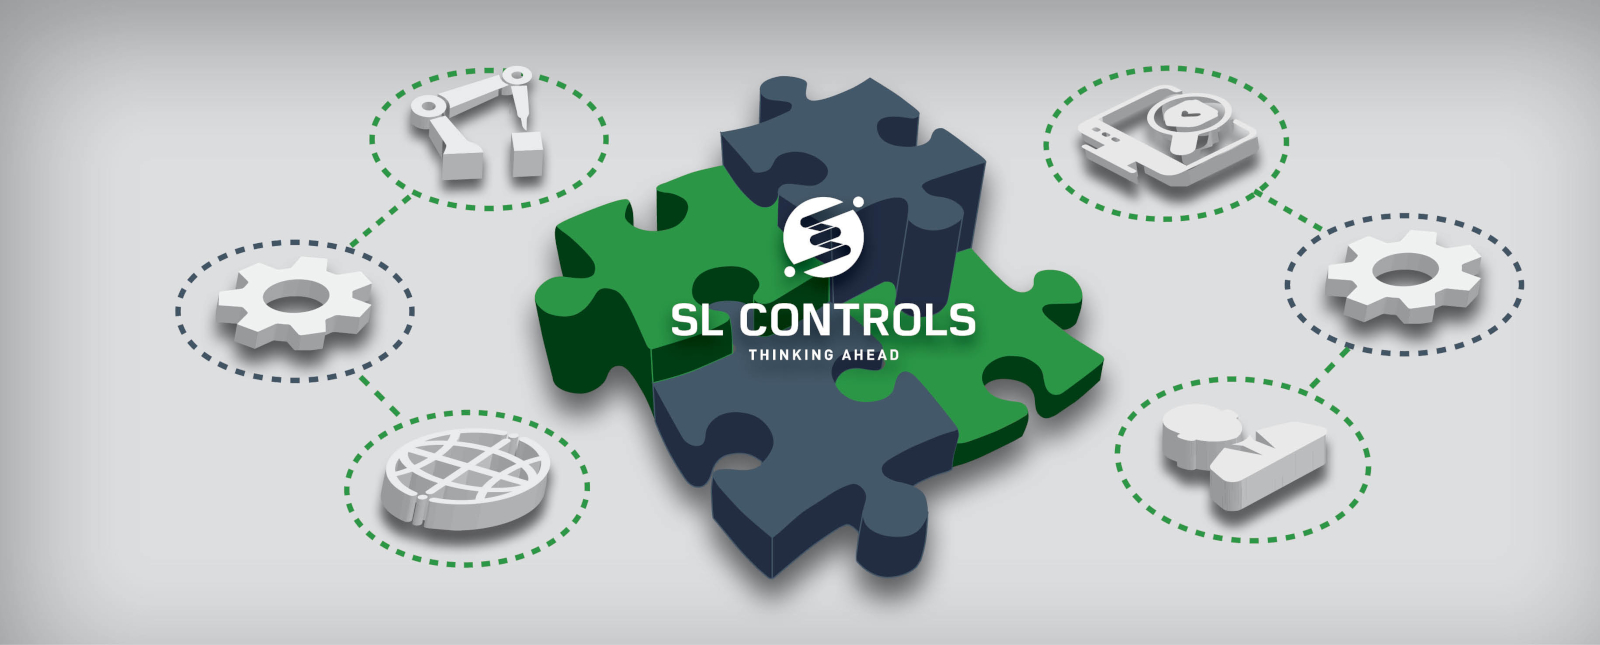 About Us - SL Controls